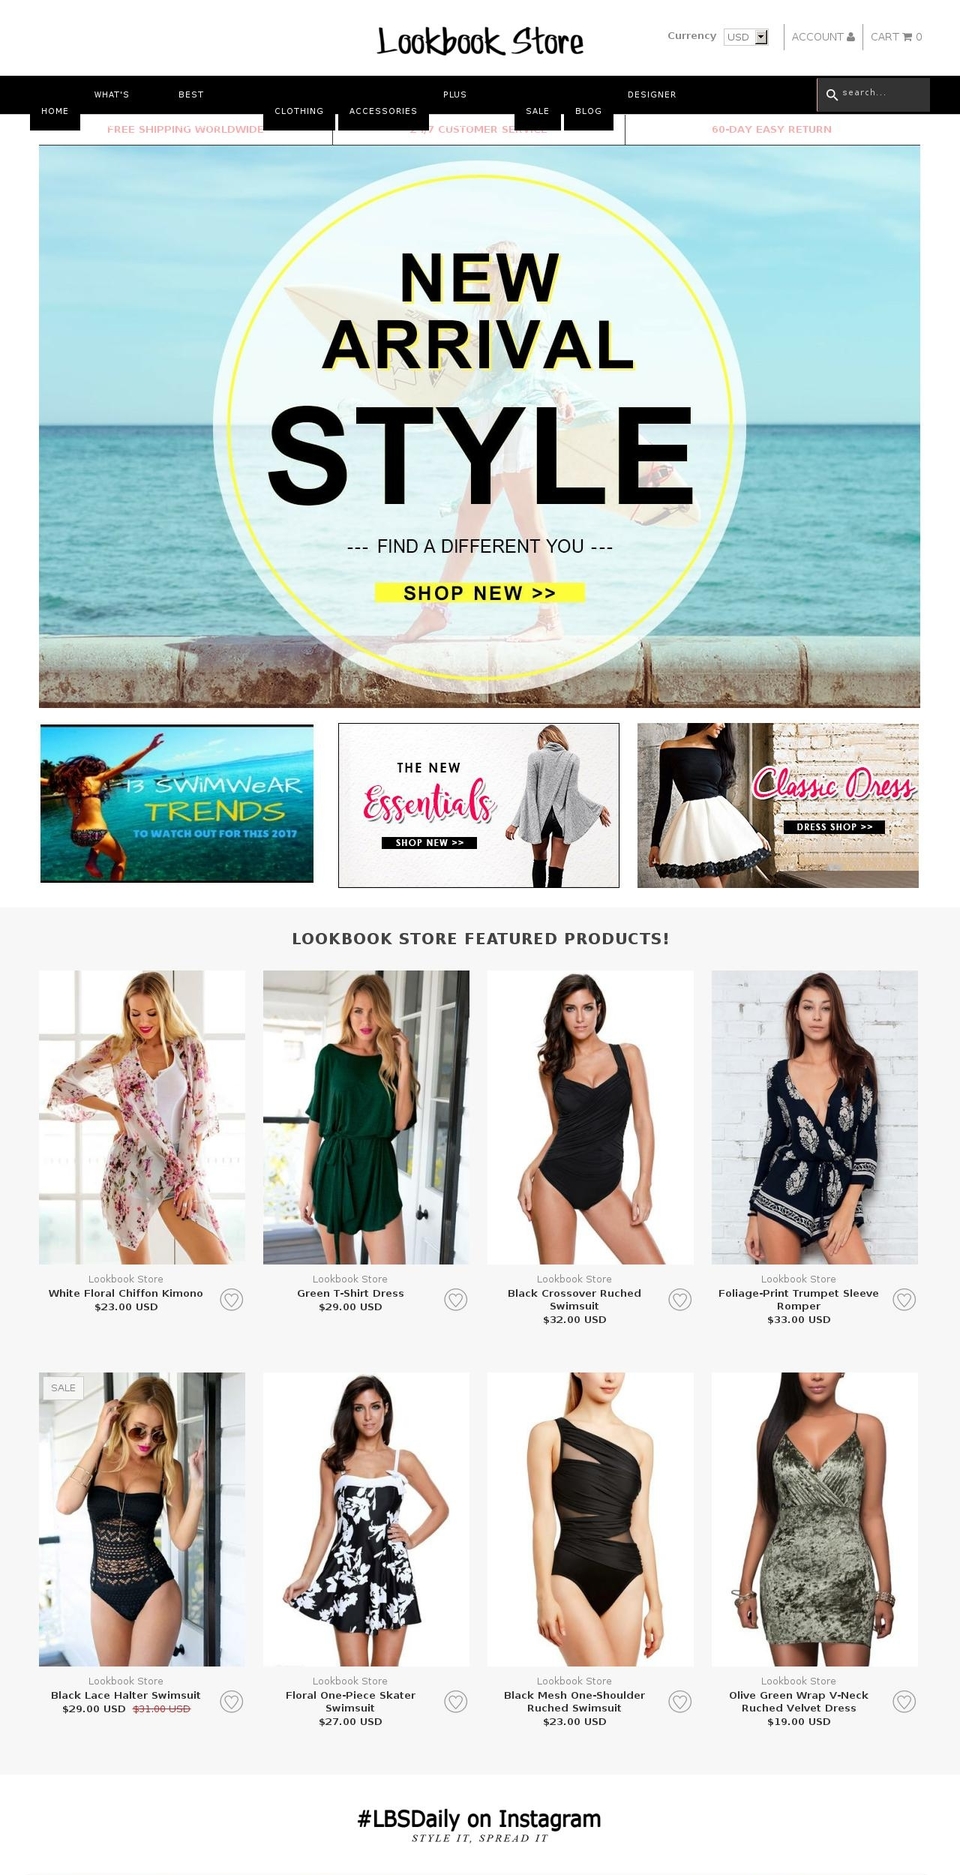 Responsive Shopify theme site example lookbookstore.co